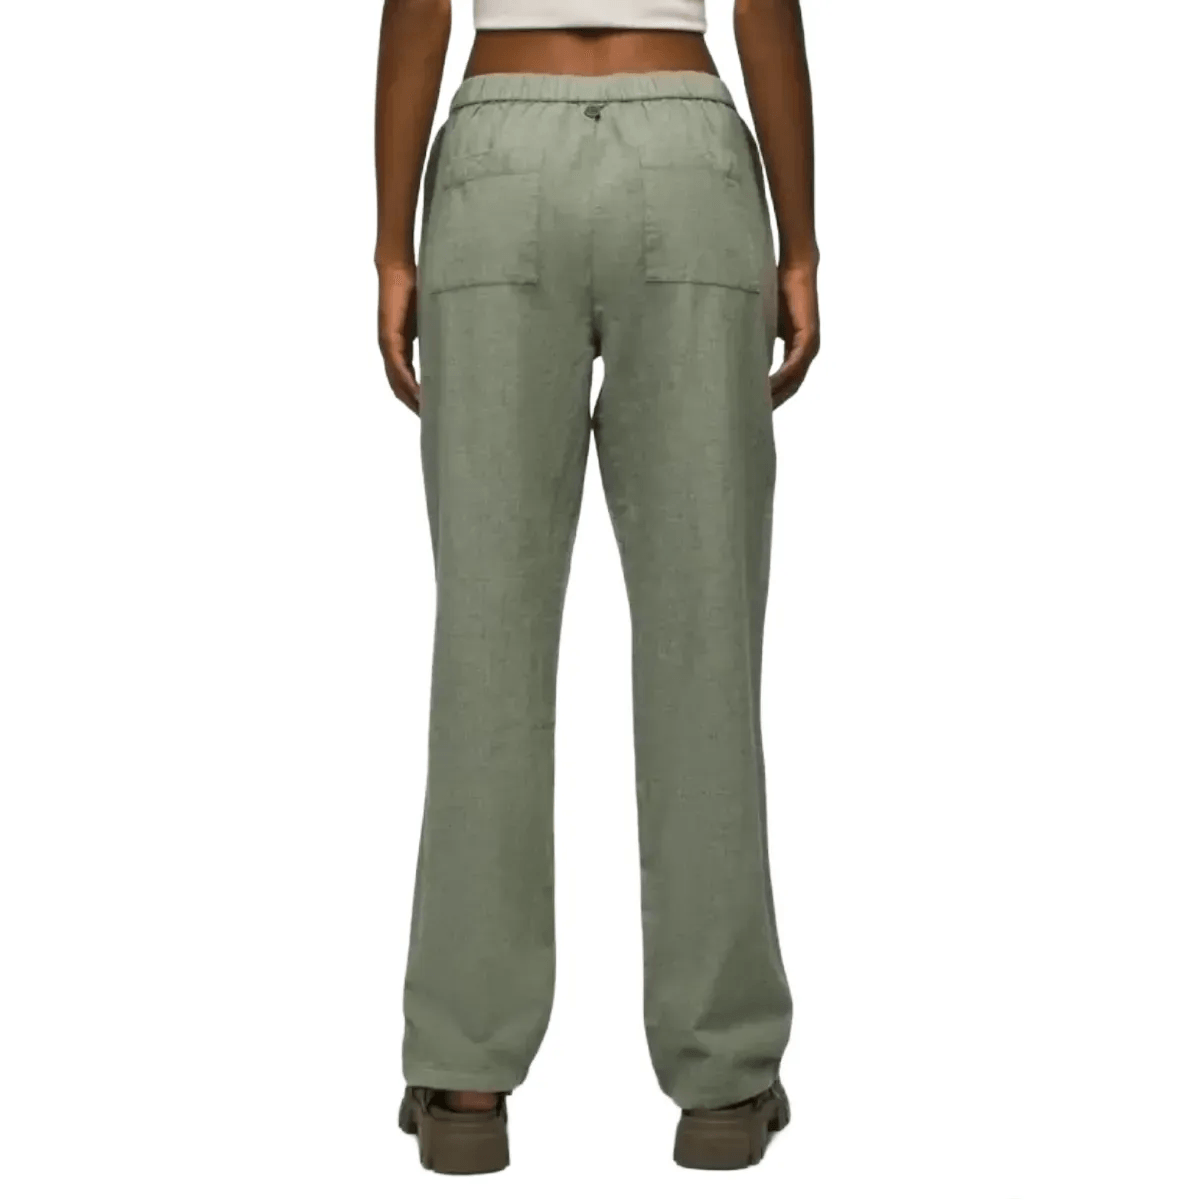 Prana June Day Pant - Women's - Al's Sporting Goods: Your One-Stop Shop for  Outdoor Sports Gear & Apparel